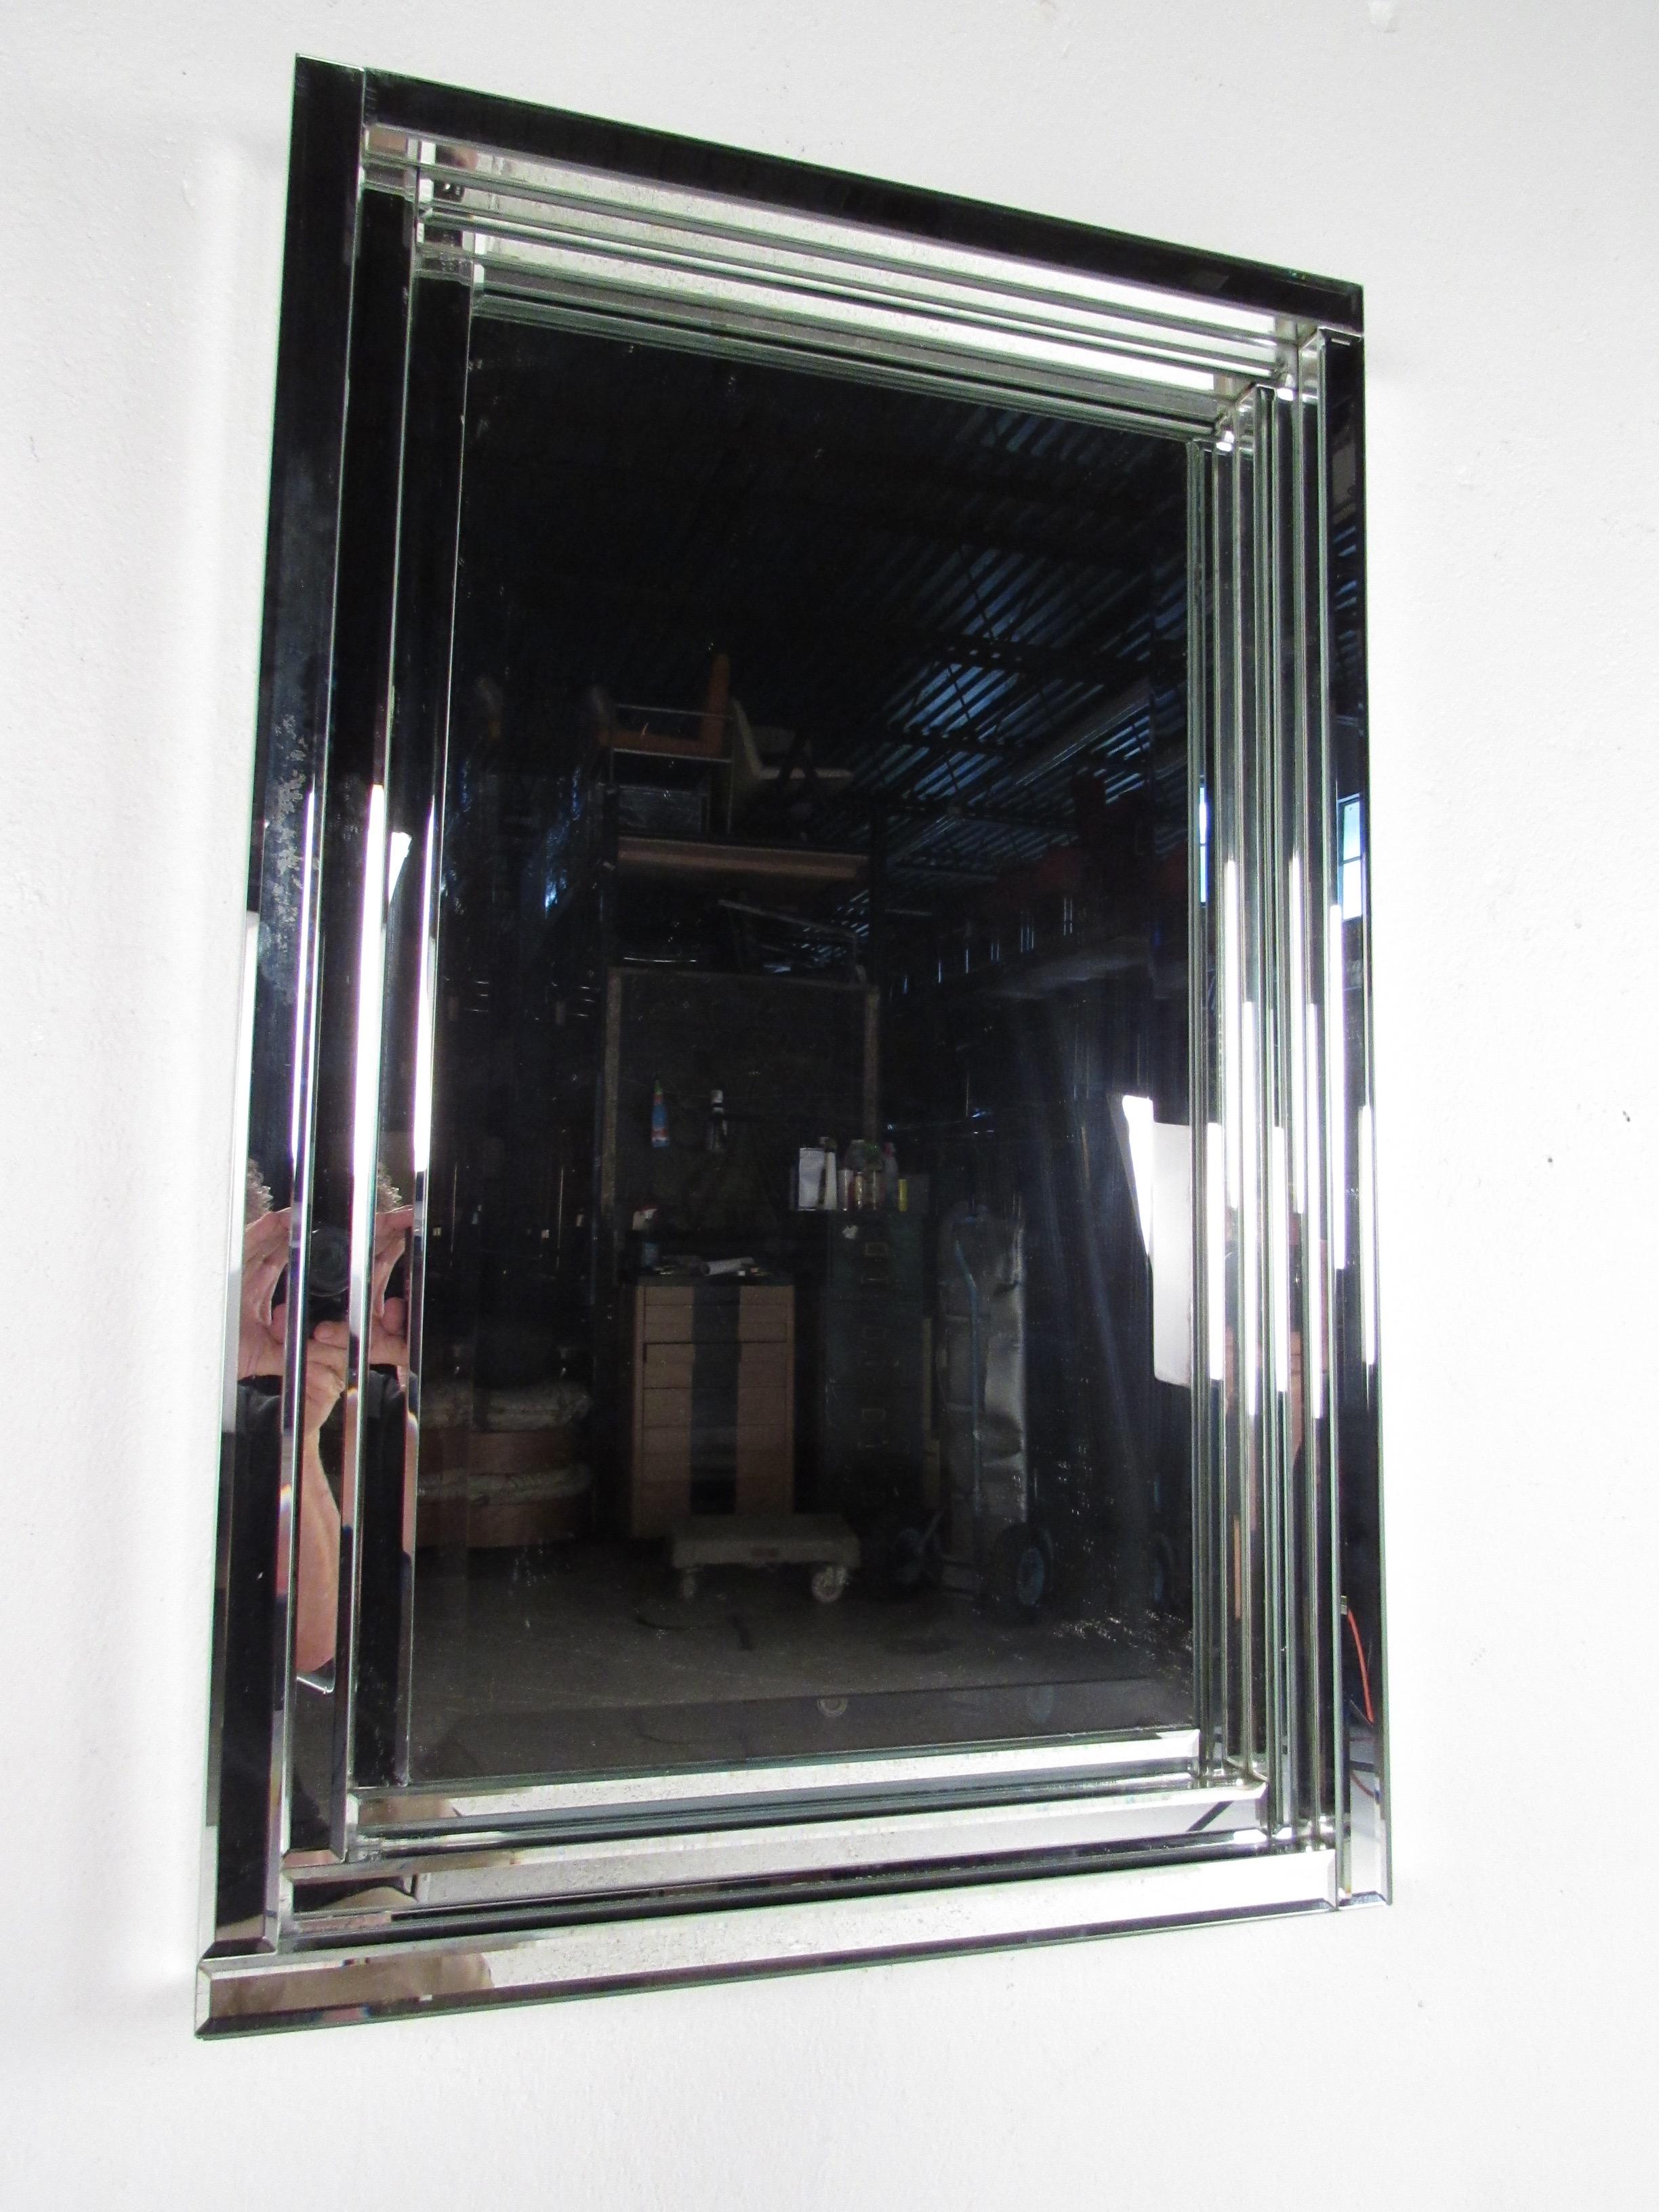 This beautiful midcentury style mirror features bevelled edge frame and makes a striking wall hanging mirror for home or business. Please confirm item location (NY or NJ).